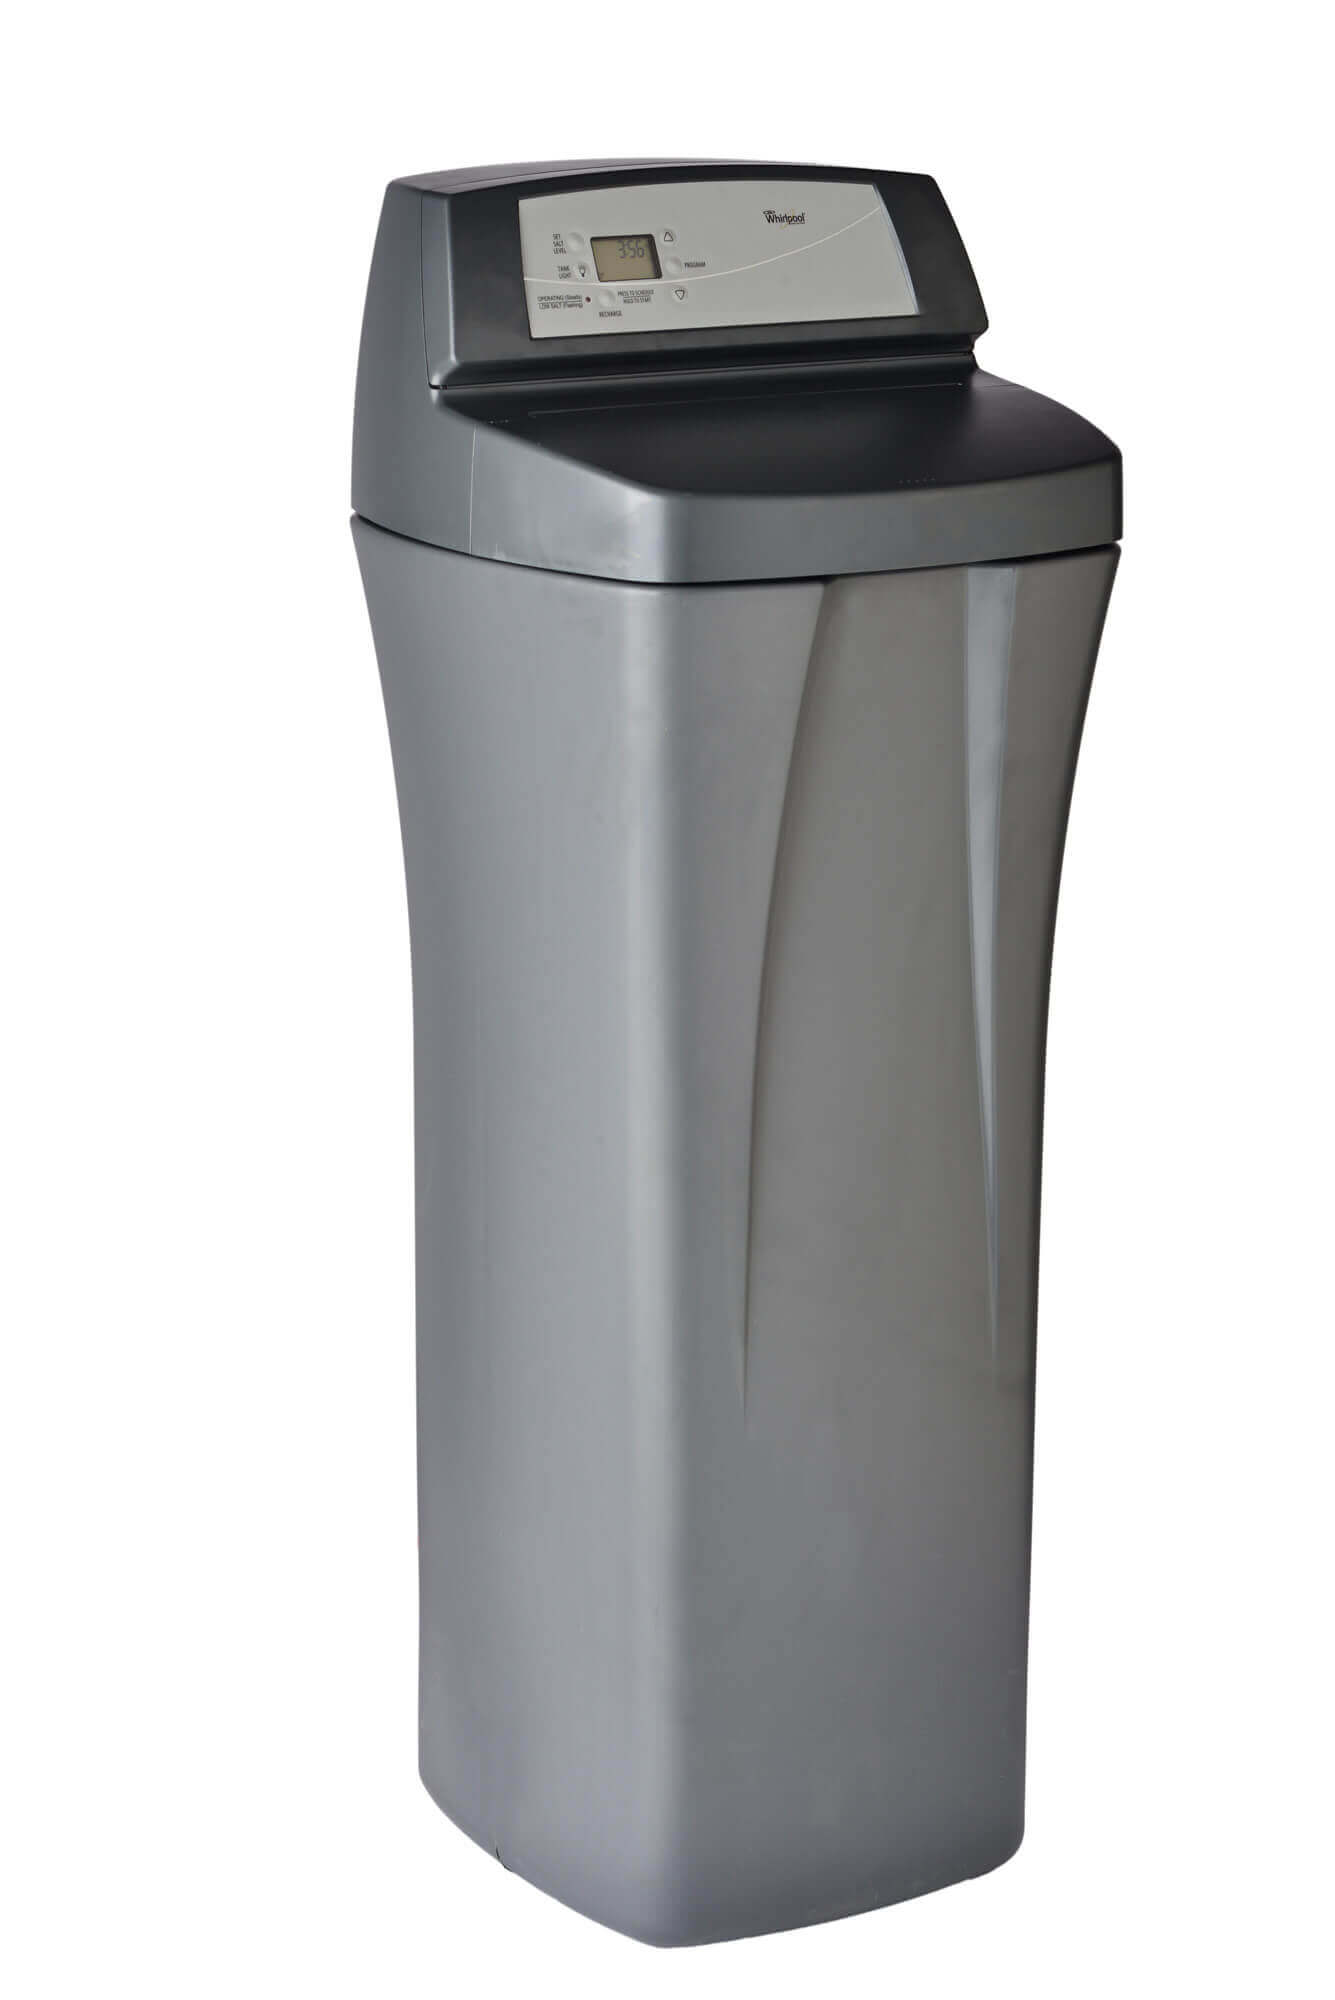 Hybrid Home Water Softener & Filtration System | Whirlpool